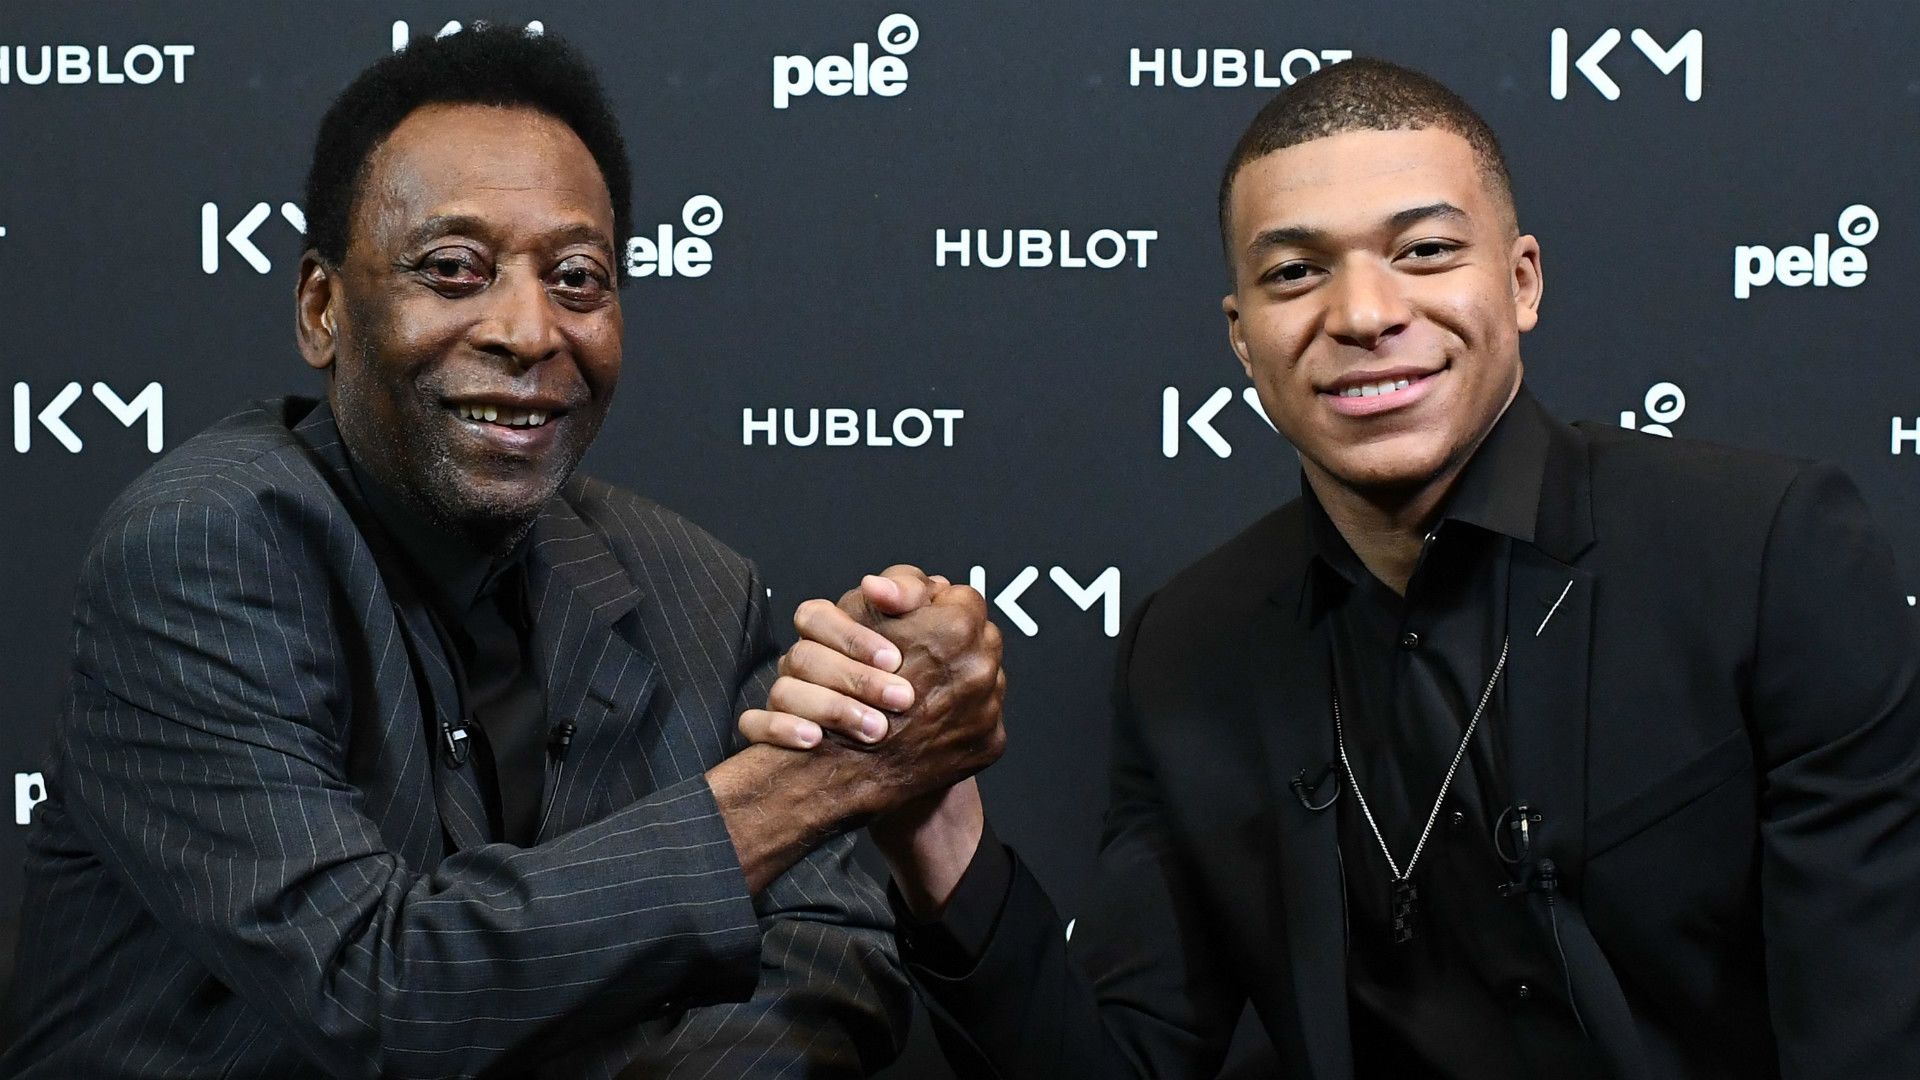 Pelé calls Mbappé a friend and praises him for breaking his World Cup record